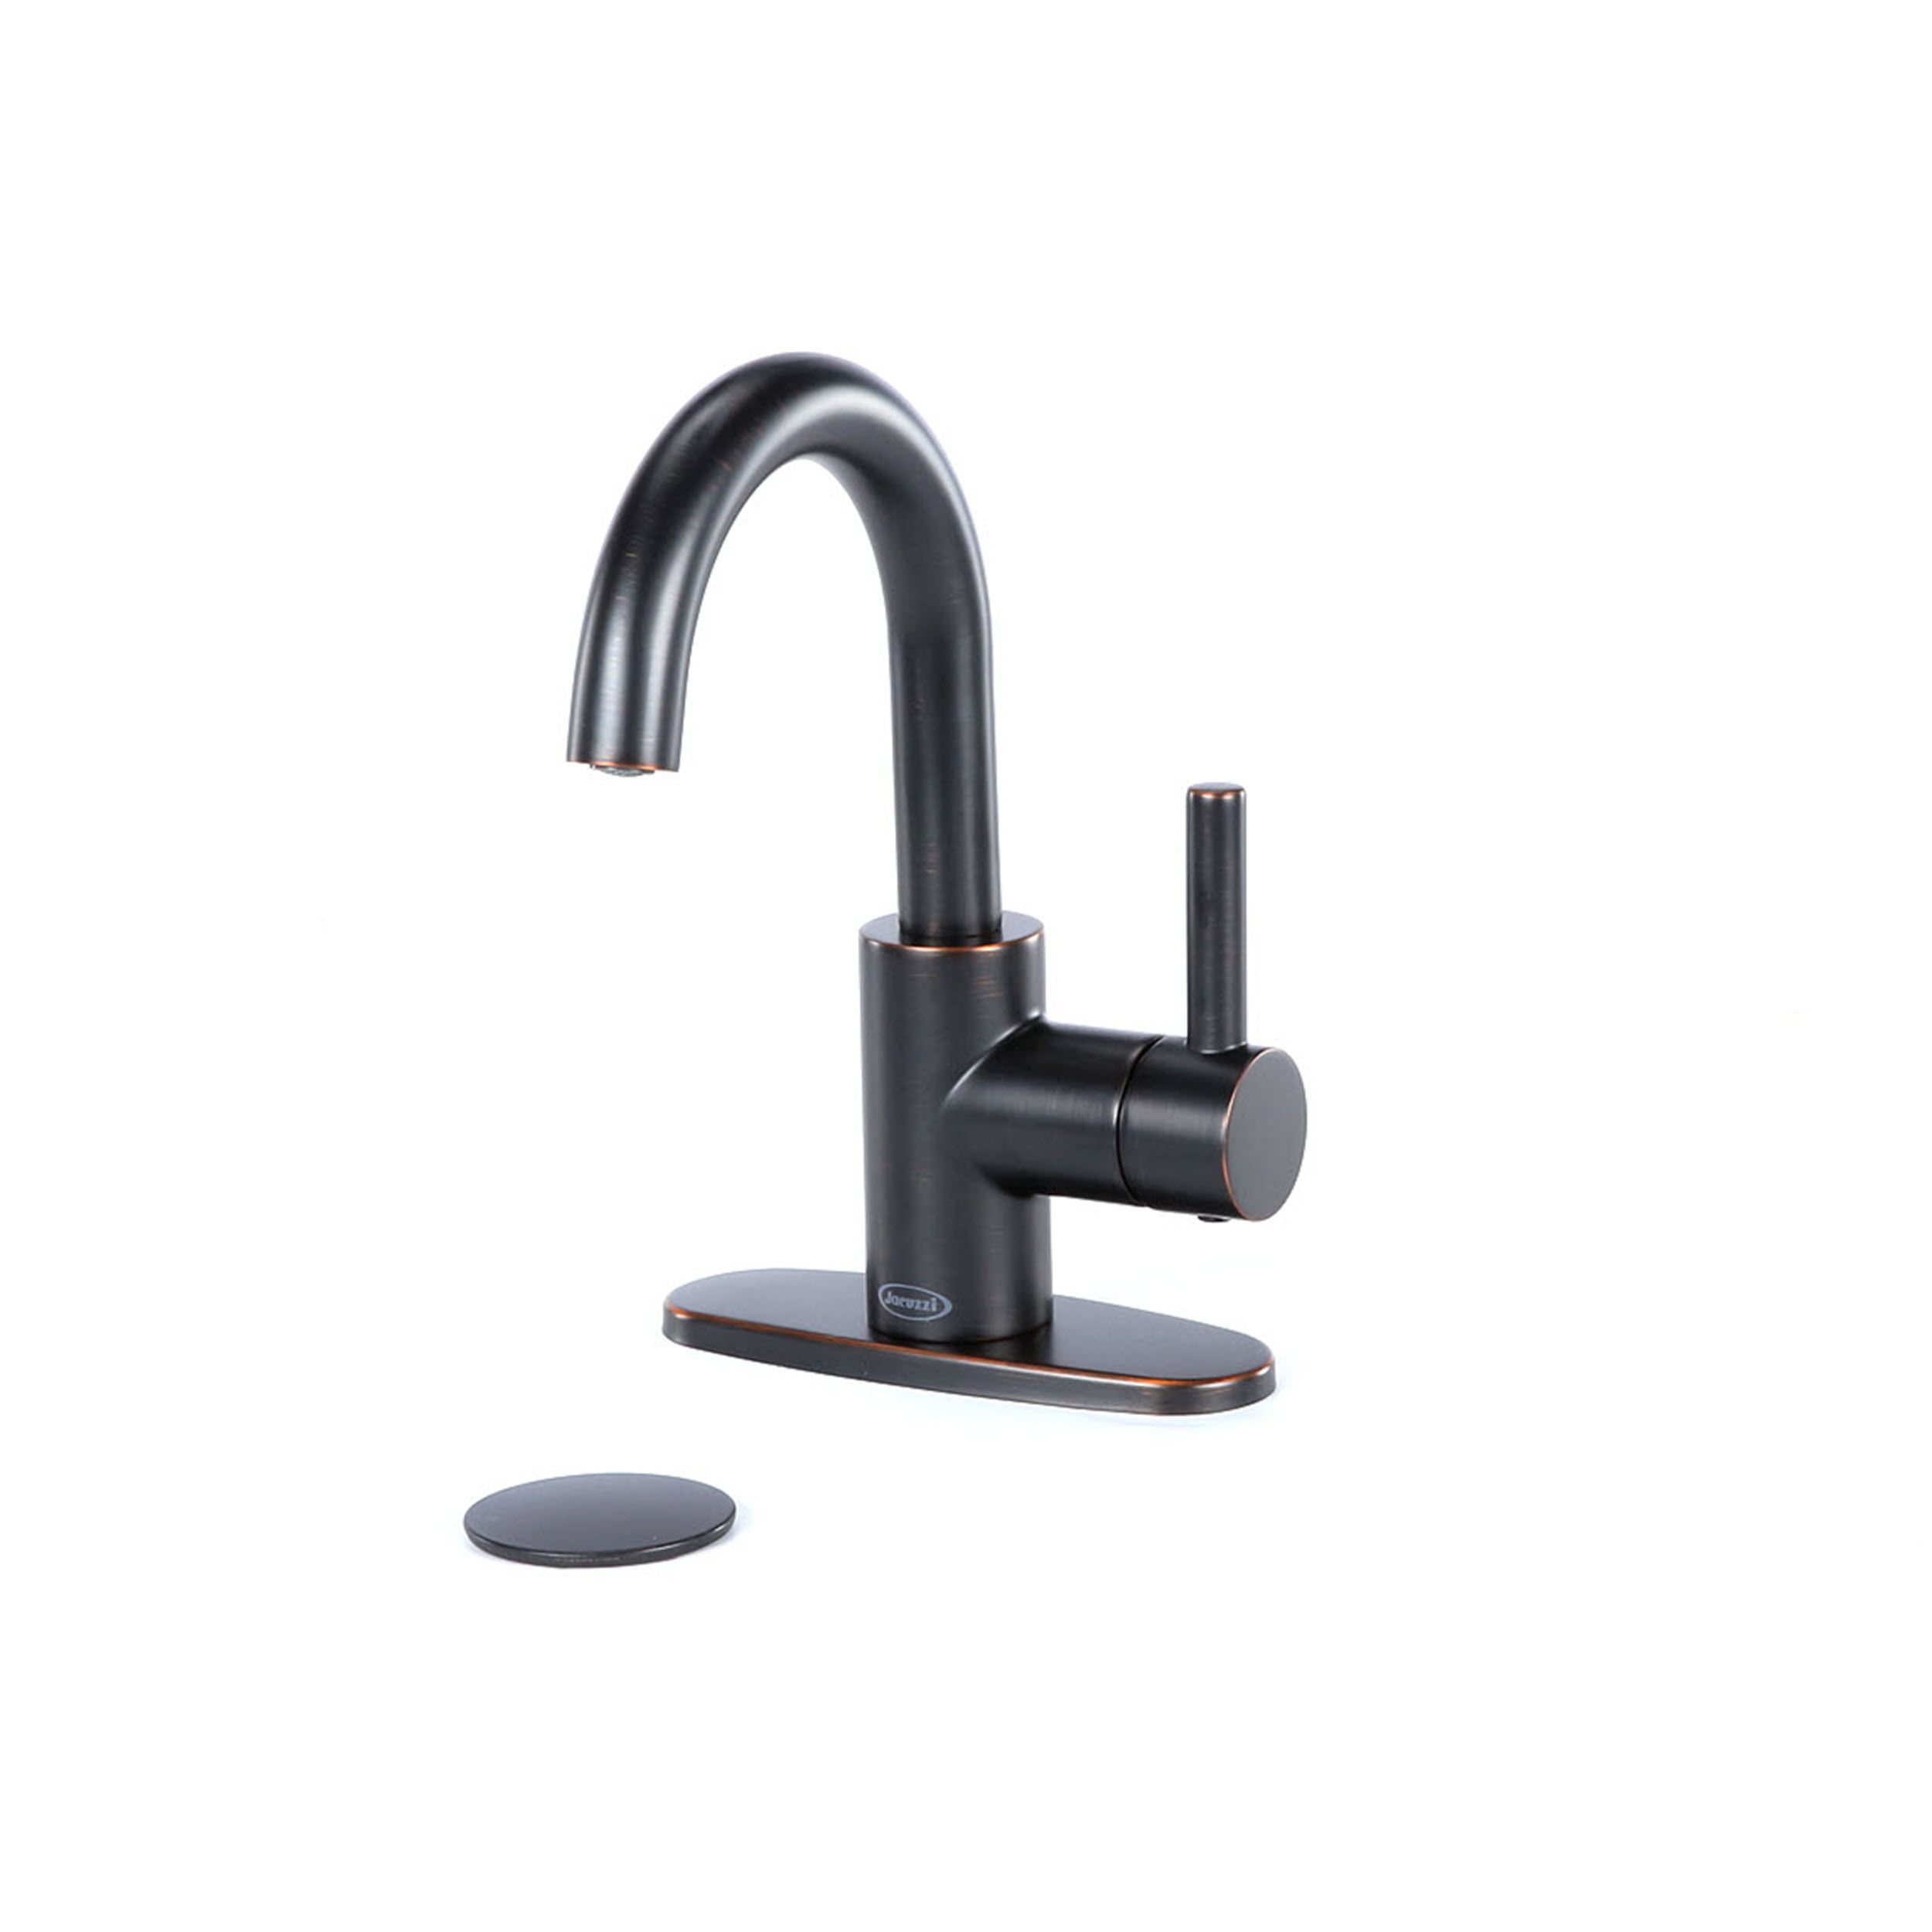 Black Oil Rubbed Brass Hot/Cold Water Kitchen Bathroom Wash Basin Sink Faucet 